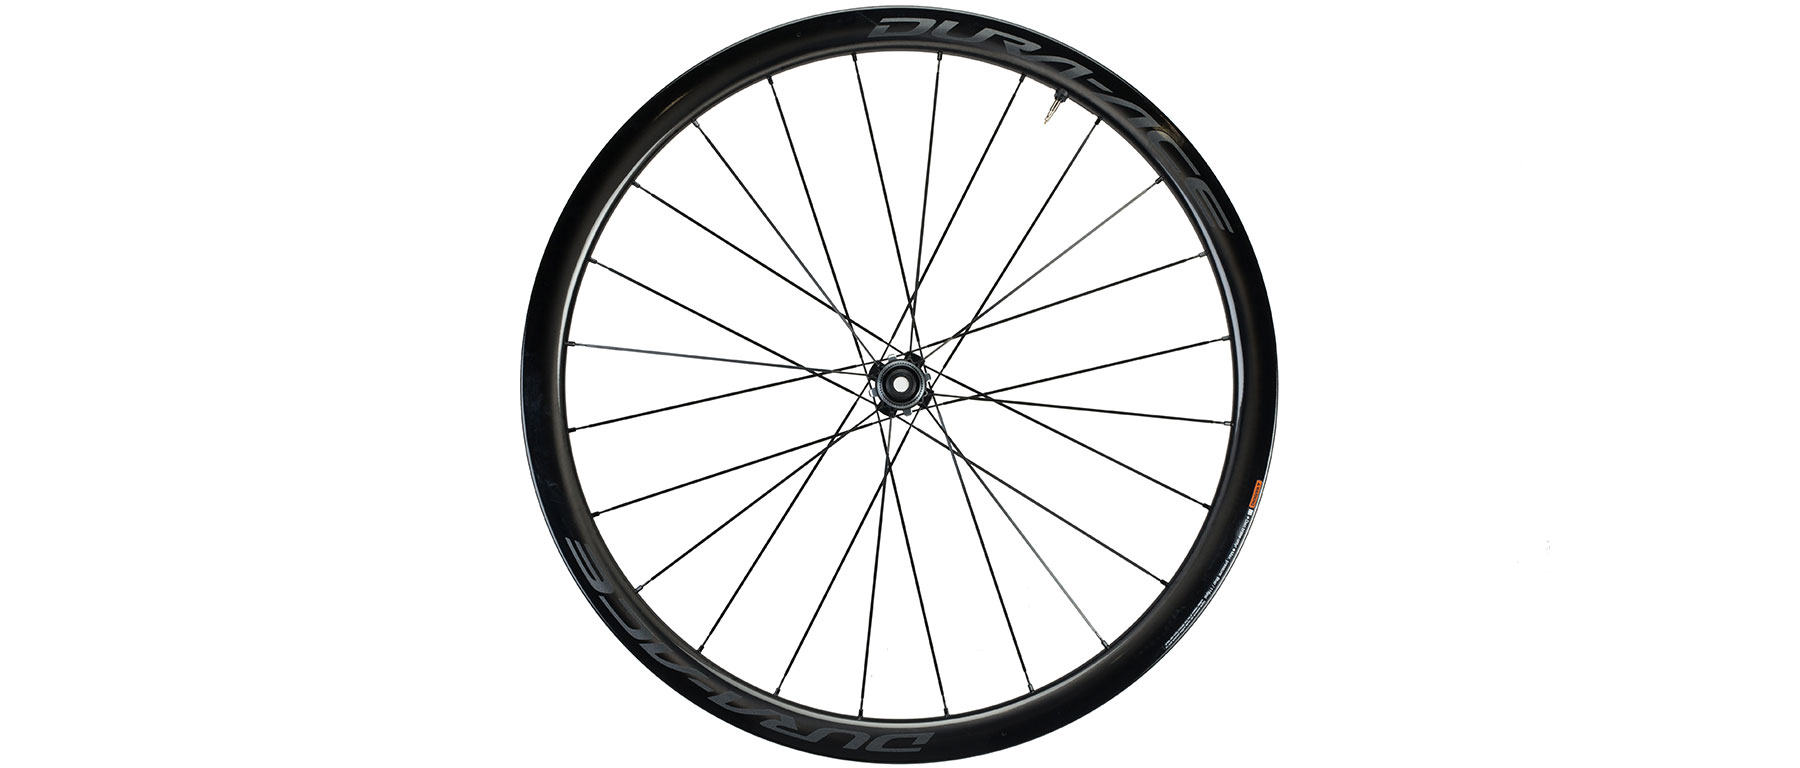 Shimano Dura-Ace WH-R9170 C40-TL Disc Wheelset